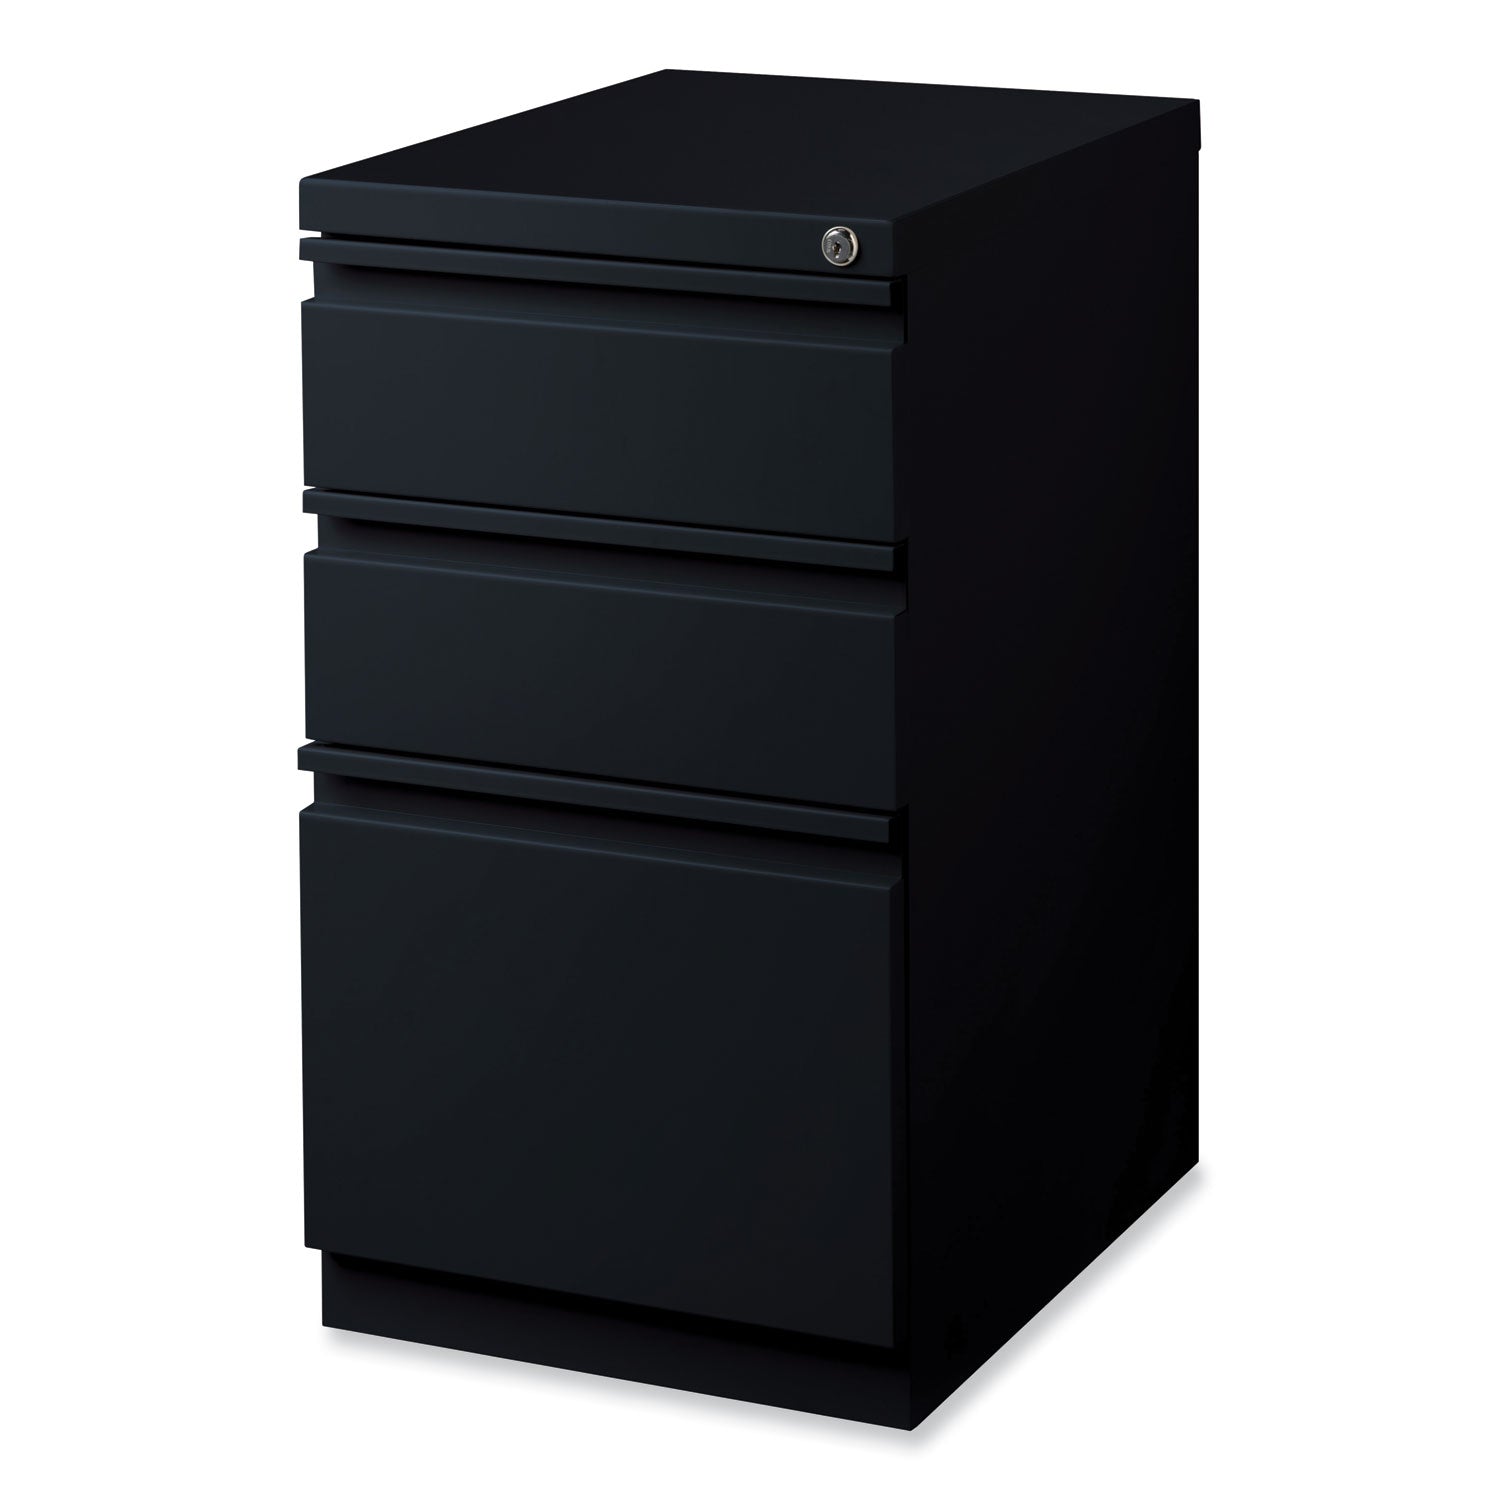 full-width-pull-20-deep-mobile-pedestal-file-box-box-file-letter-black-15-x-1988-x-2775-ships-in-4-6-business-days_hid18575 - 1